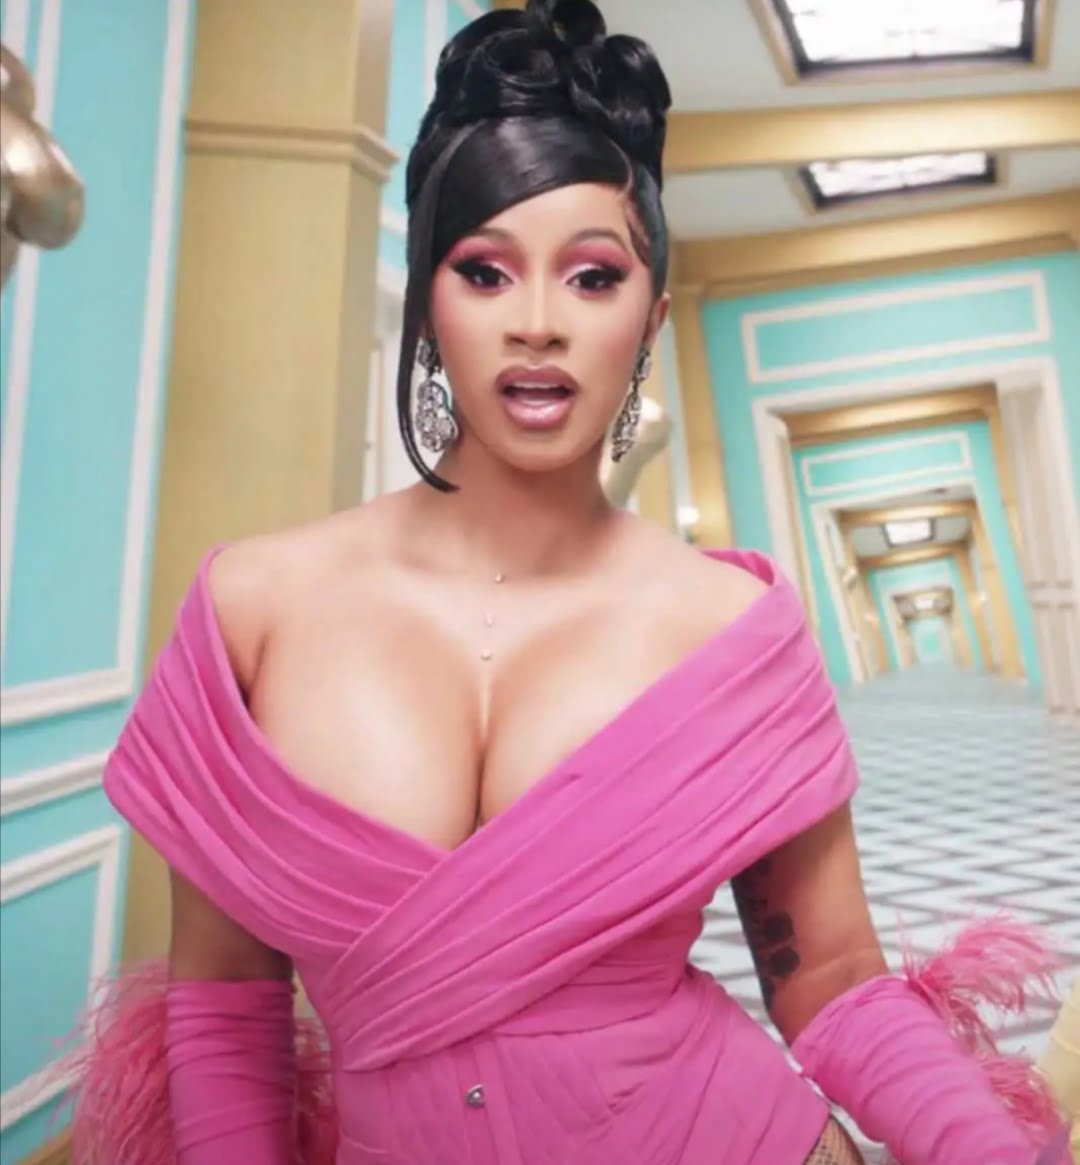 Cardi B is announced Woman of the Year by Billboards